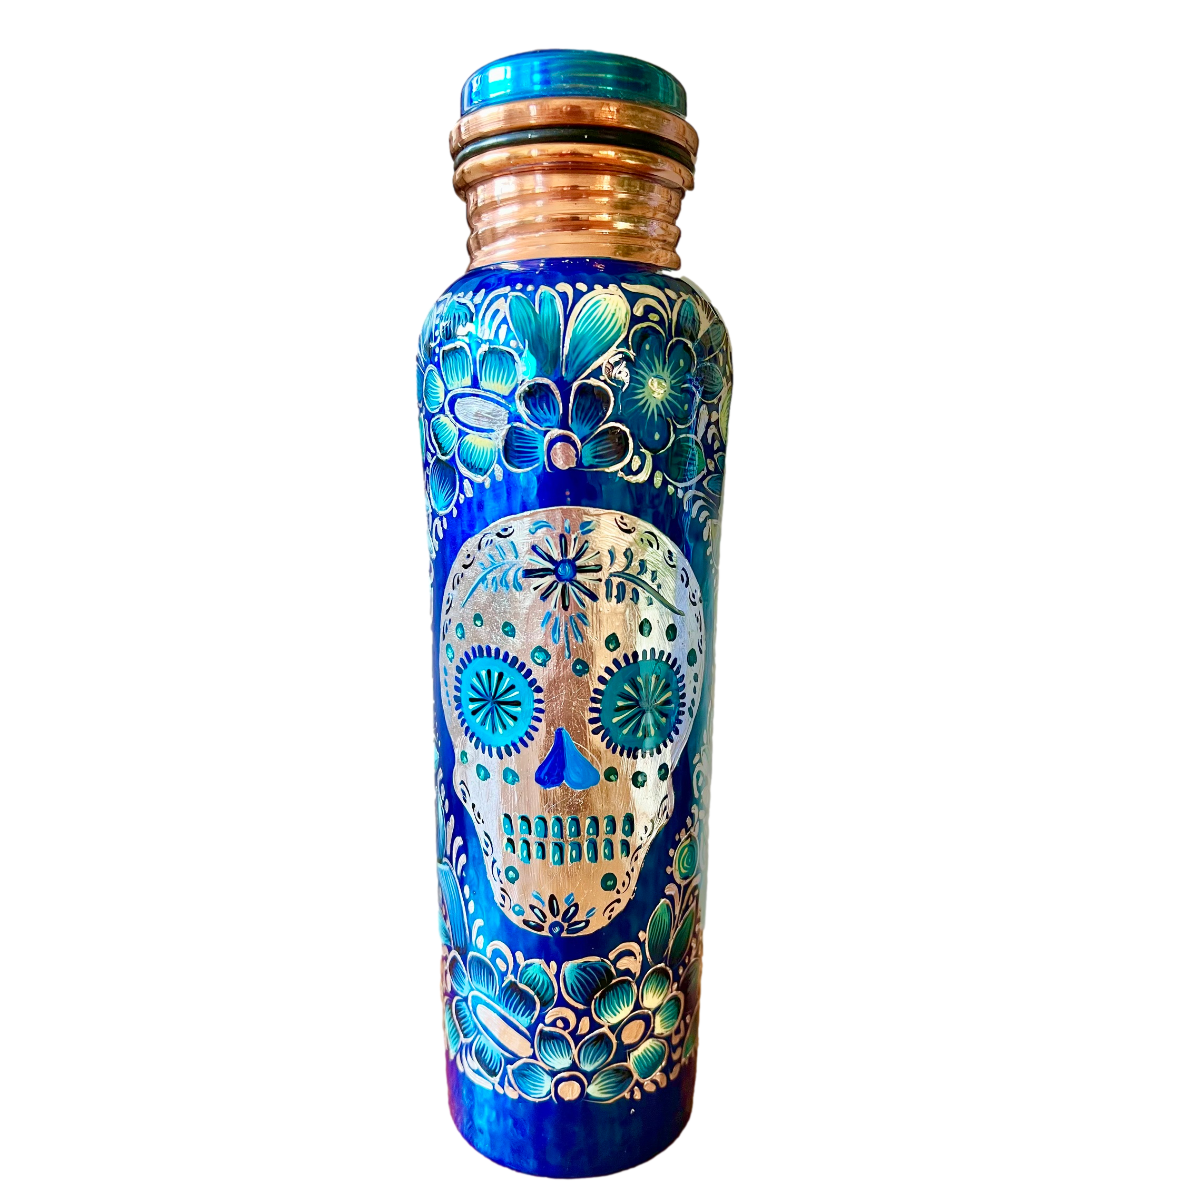 Mexican Copper 1 L / 33 oz. Water Bottle- Hand Painted Blue Sugar Skull CoLores Decor